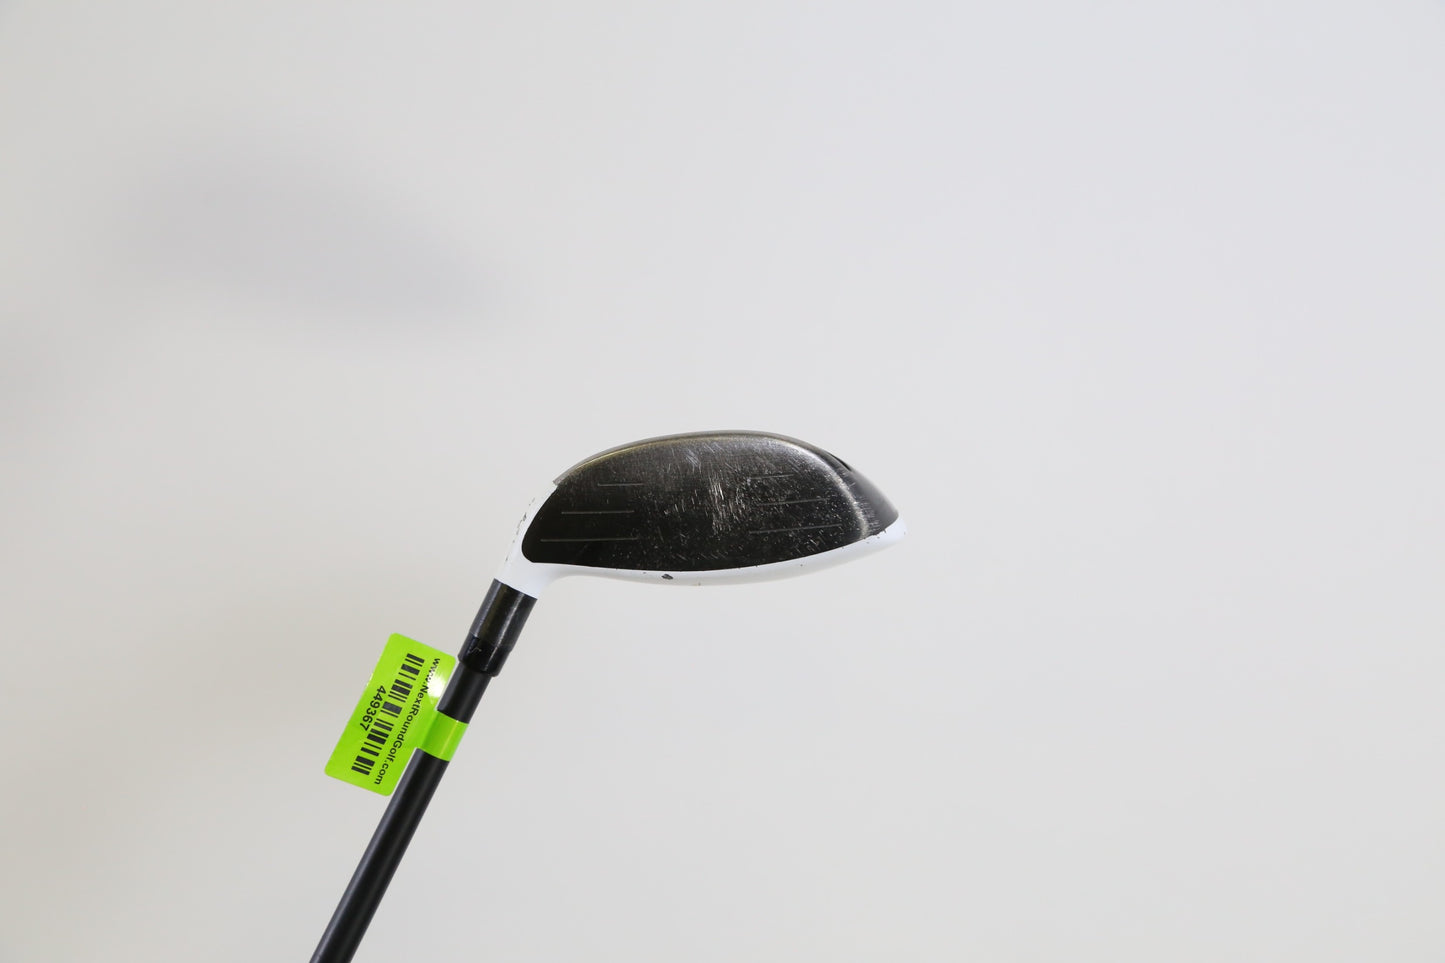 Used TaylorMade RocketBallz RBZ Stage 2 5-Wood - Right-Handed - 21 Degrees - Ladies Flex